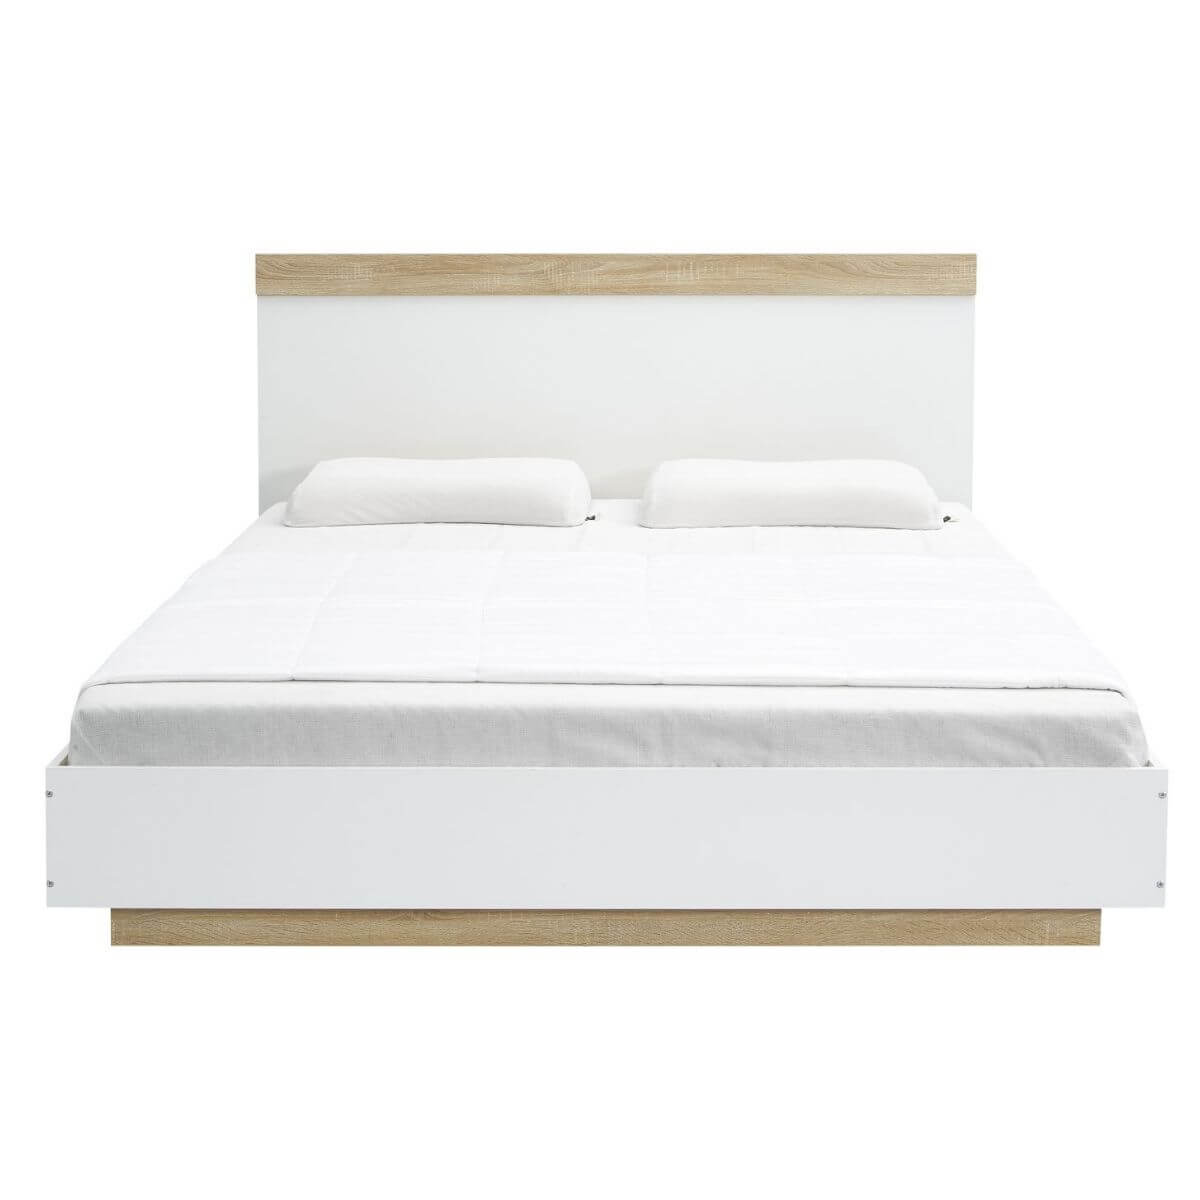 Aiden Industrial Contemporary White Oak Bed Frame - Double - ozily